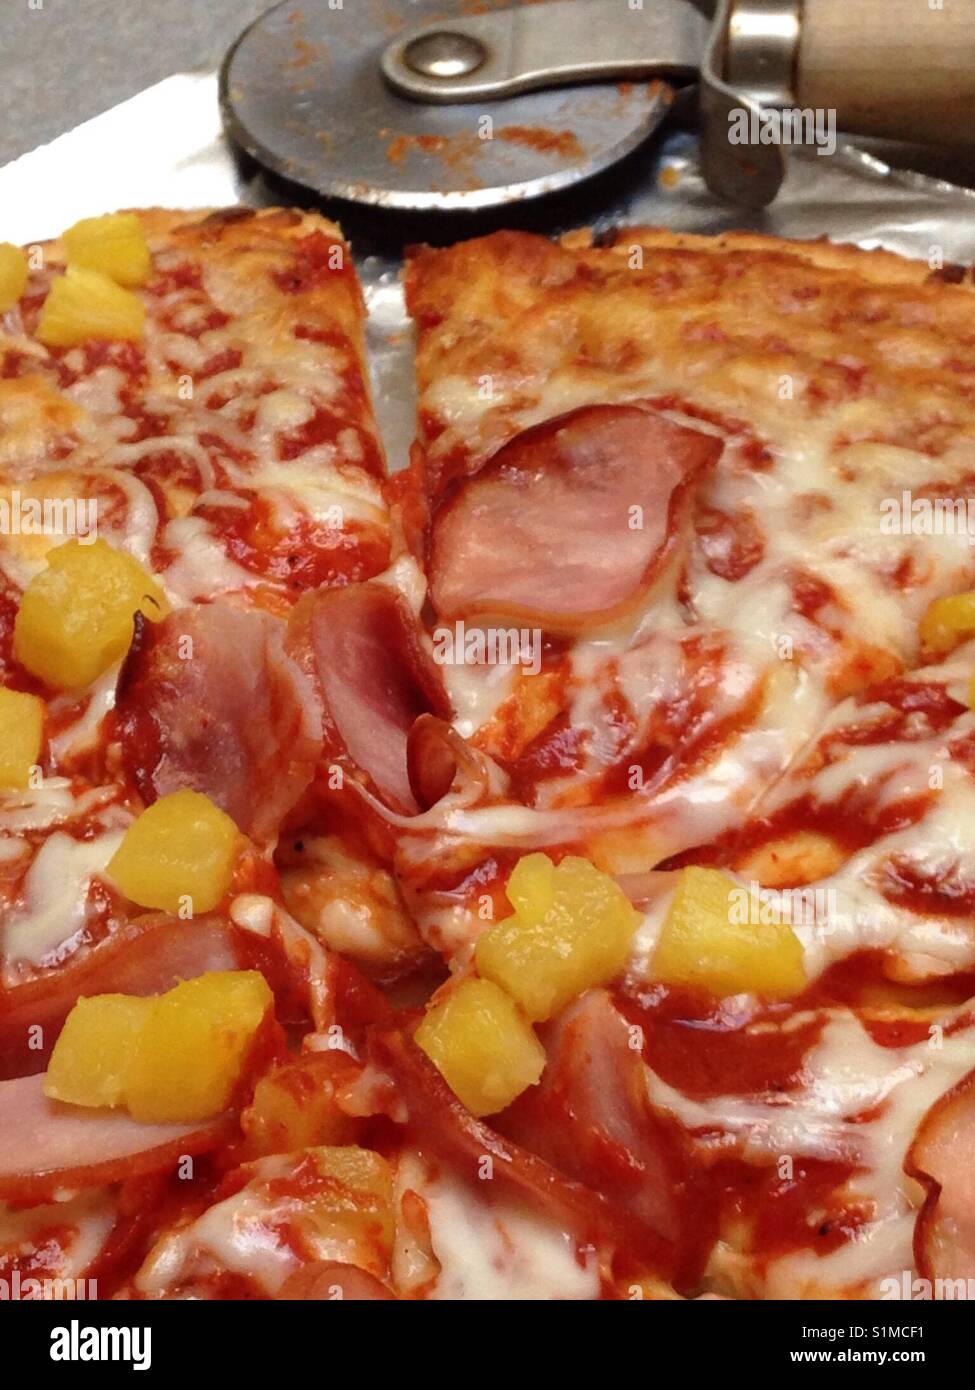 Pineapple and Canadian bacon pizza -sliced and ready to eat Stock Photo